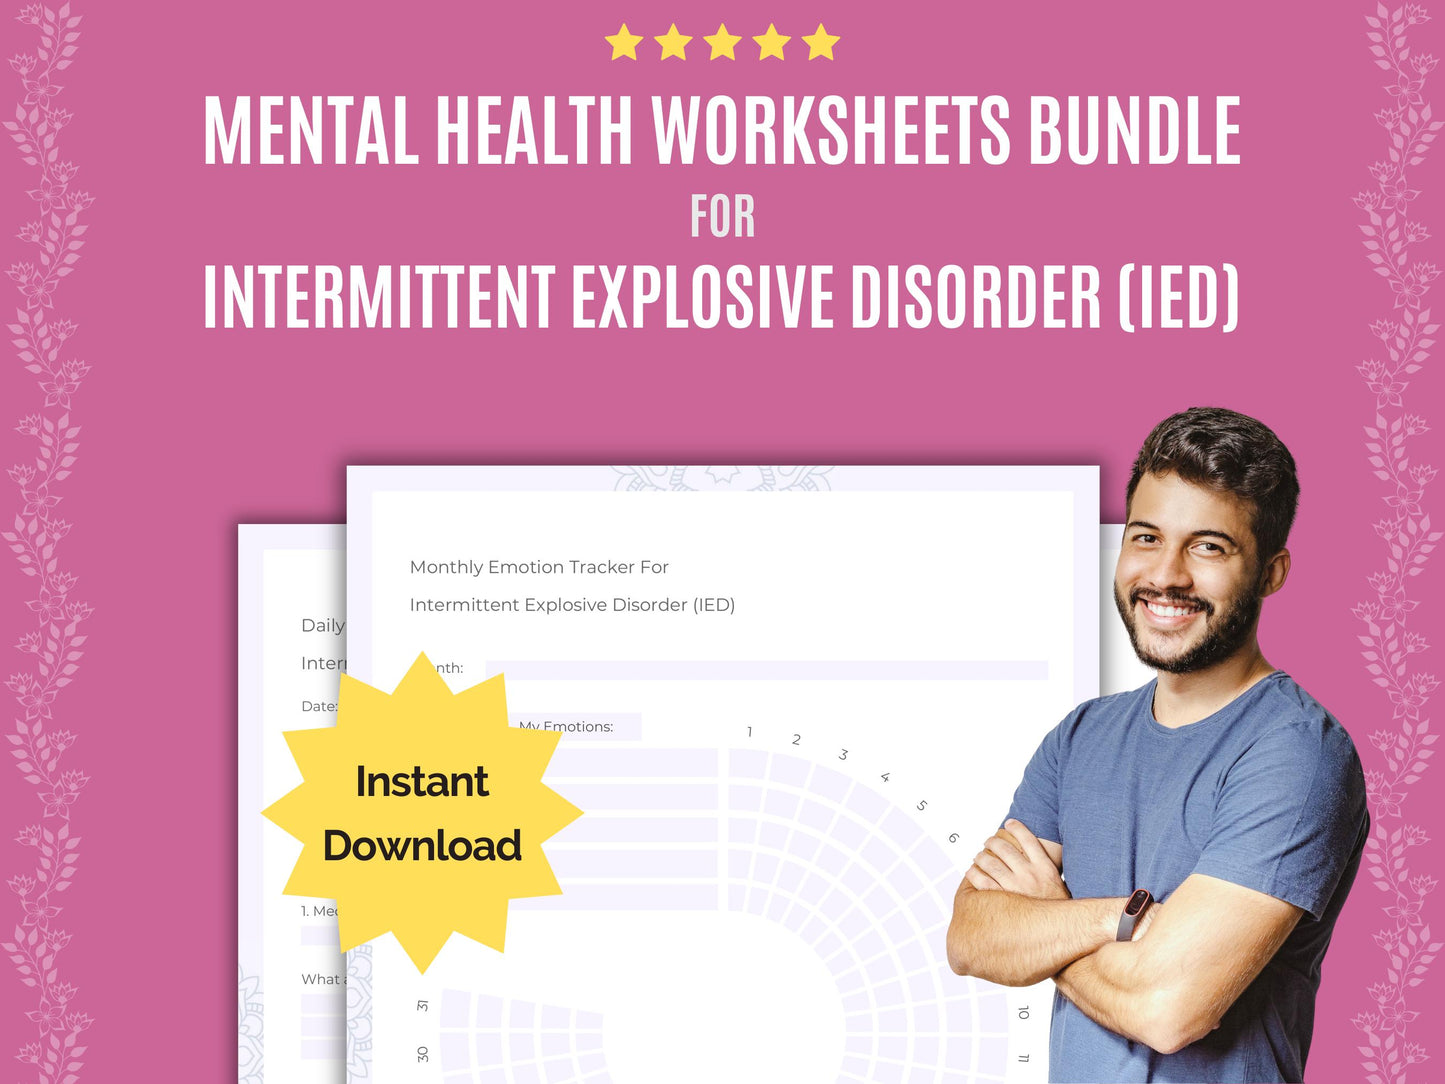 Disorder, IED Workbooks, IED Cheat Sheet, IED Templates, IED Journals, IED Planners, IED Journaling, IED Notes, Explosive, IED Counseling, IED Therapy, IED Tools, IED Resources, Intermittent, IED Goal Setting, IED Mental Health